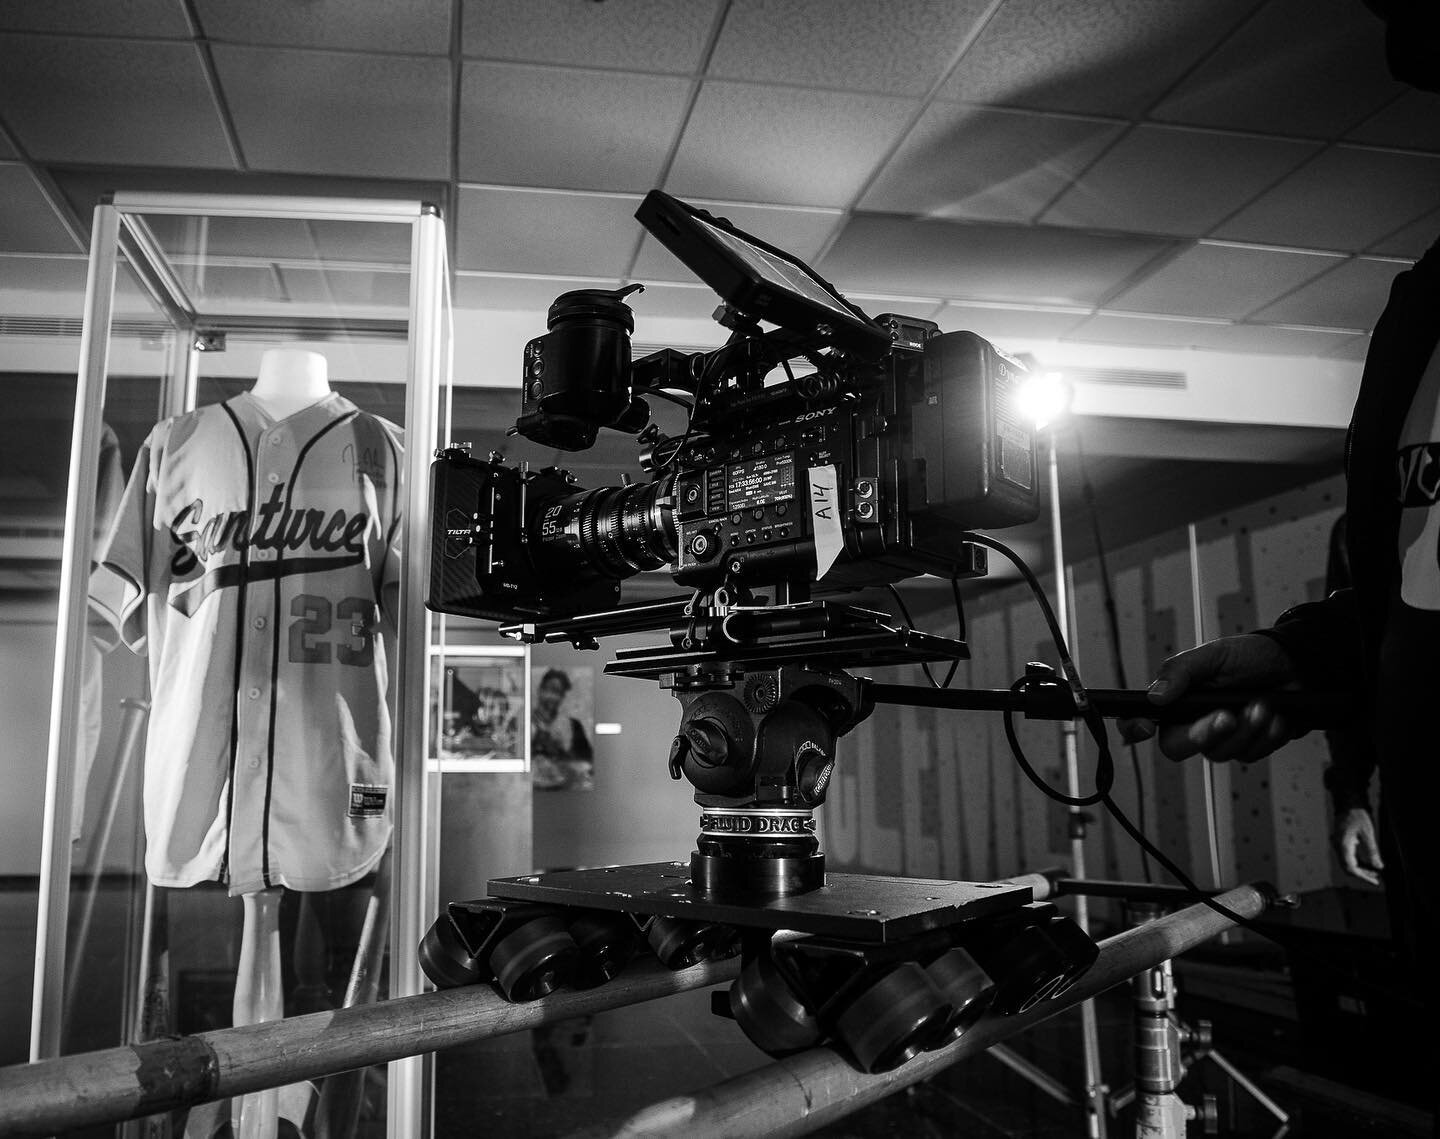 Our @sony #F55 utilized when shooting a documentary about #Santurce #Cangrejeros baseball team 

Director @reidwittman 
Producer @mikebigpr 
DOP @angelcastro_dp 

#documentary #cangrejeros #baseball #legends #filming #producer #puertorico #director #